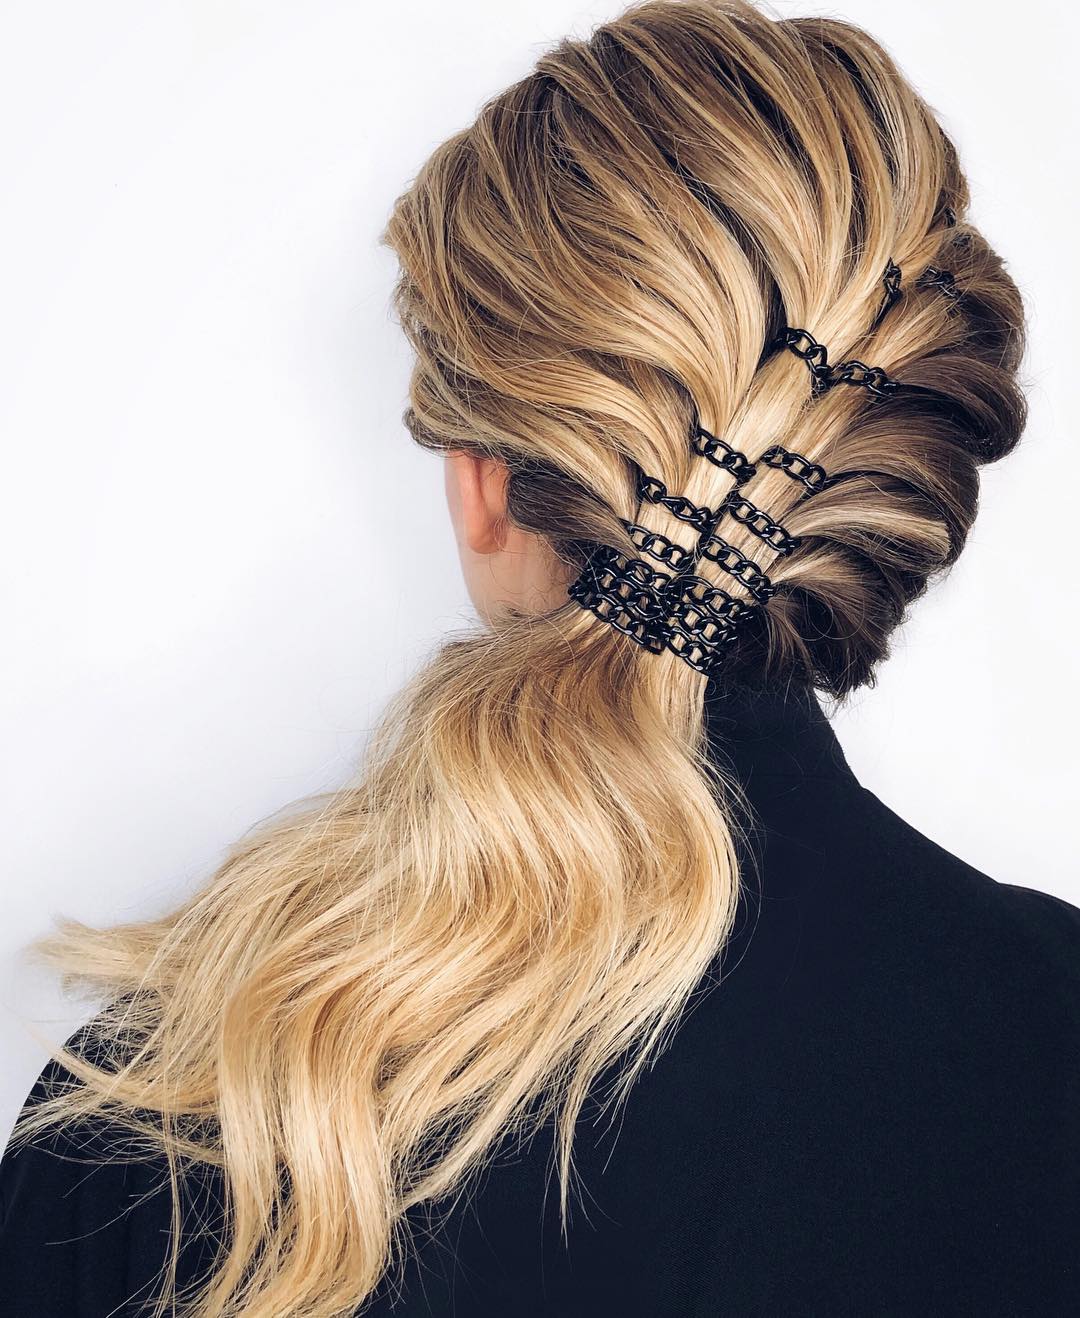 low side pony with chain accessory